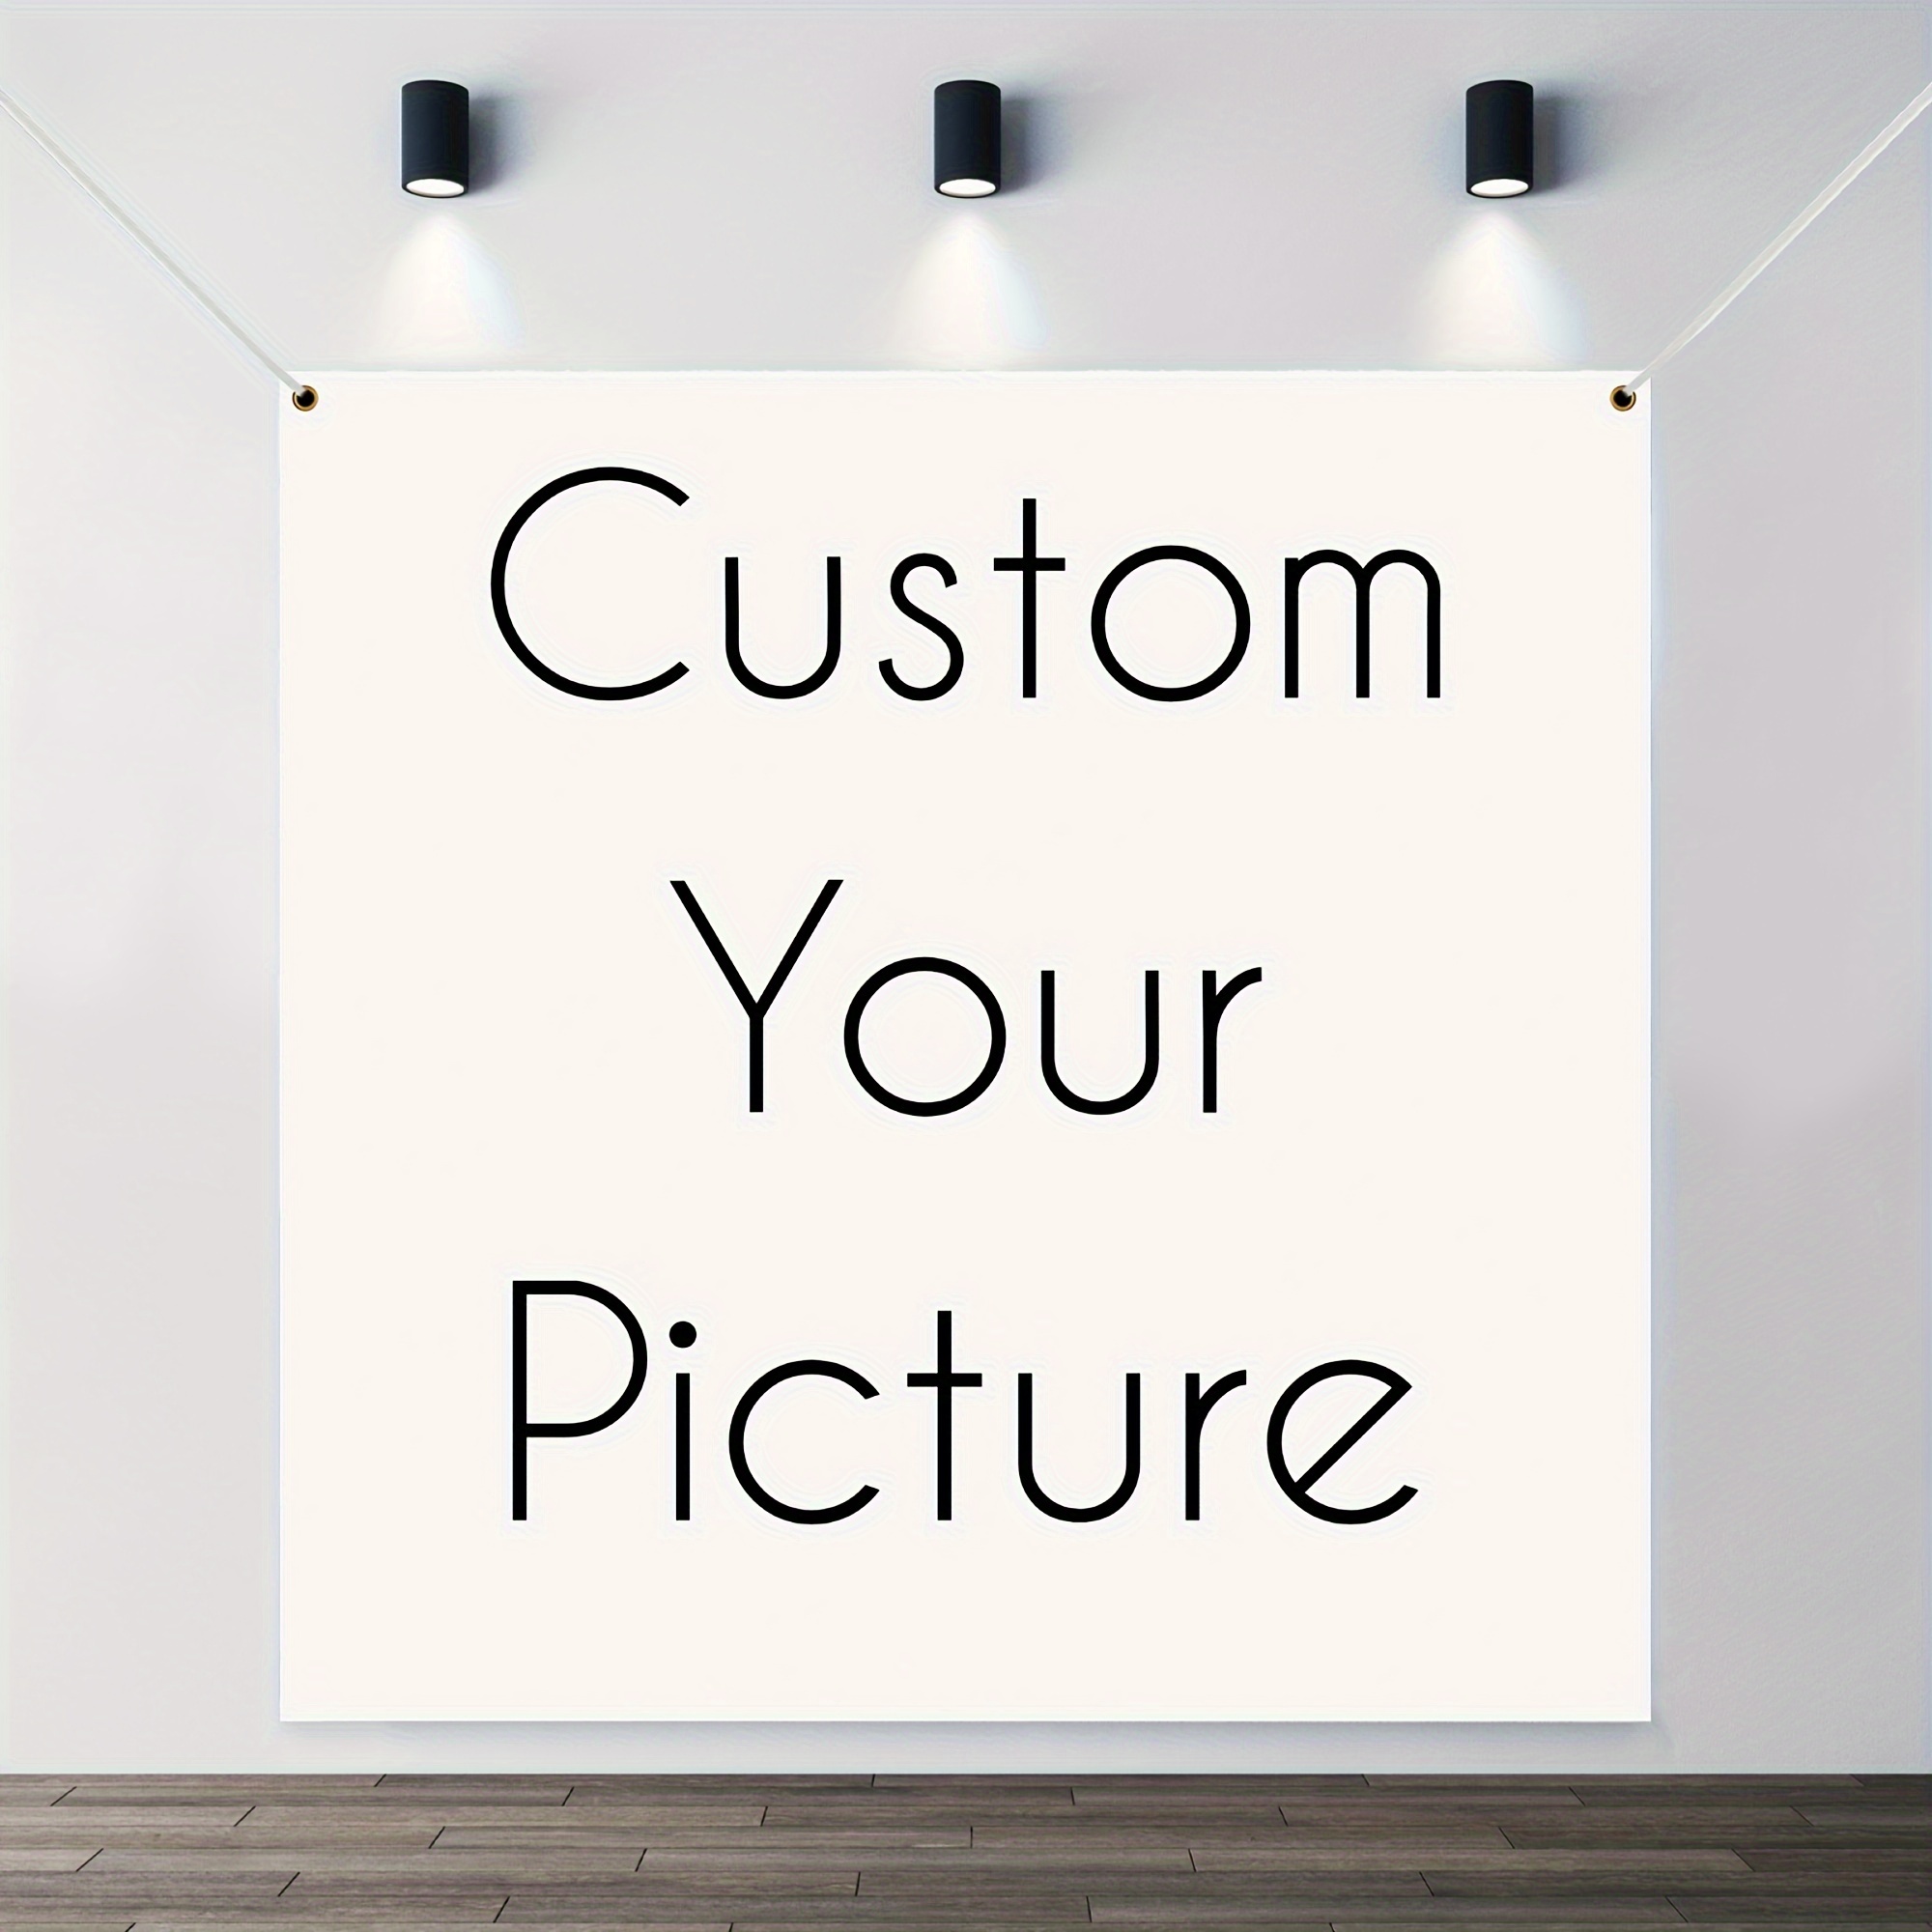 

Customizable Linen Square Banner - Durable 100% Linen, Personalized Image, Quadruple Stitched Edges For Any Occasion, White - Ideal For Party Decorations & Supplies, Upload Your Picture - 1pc